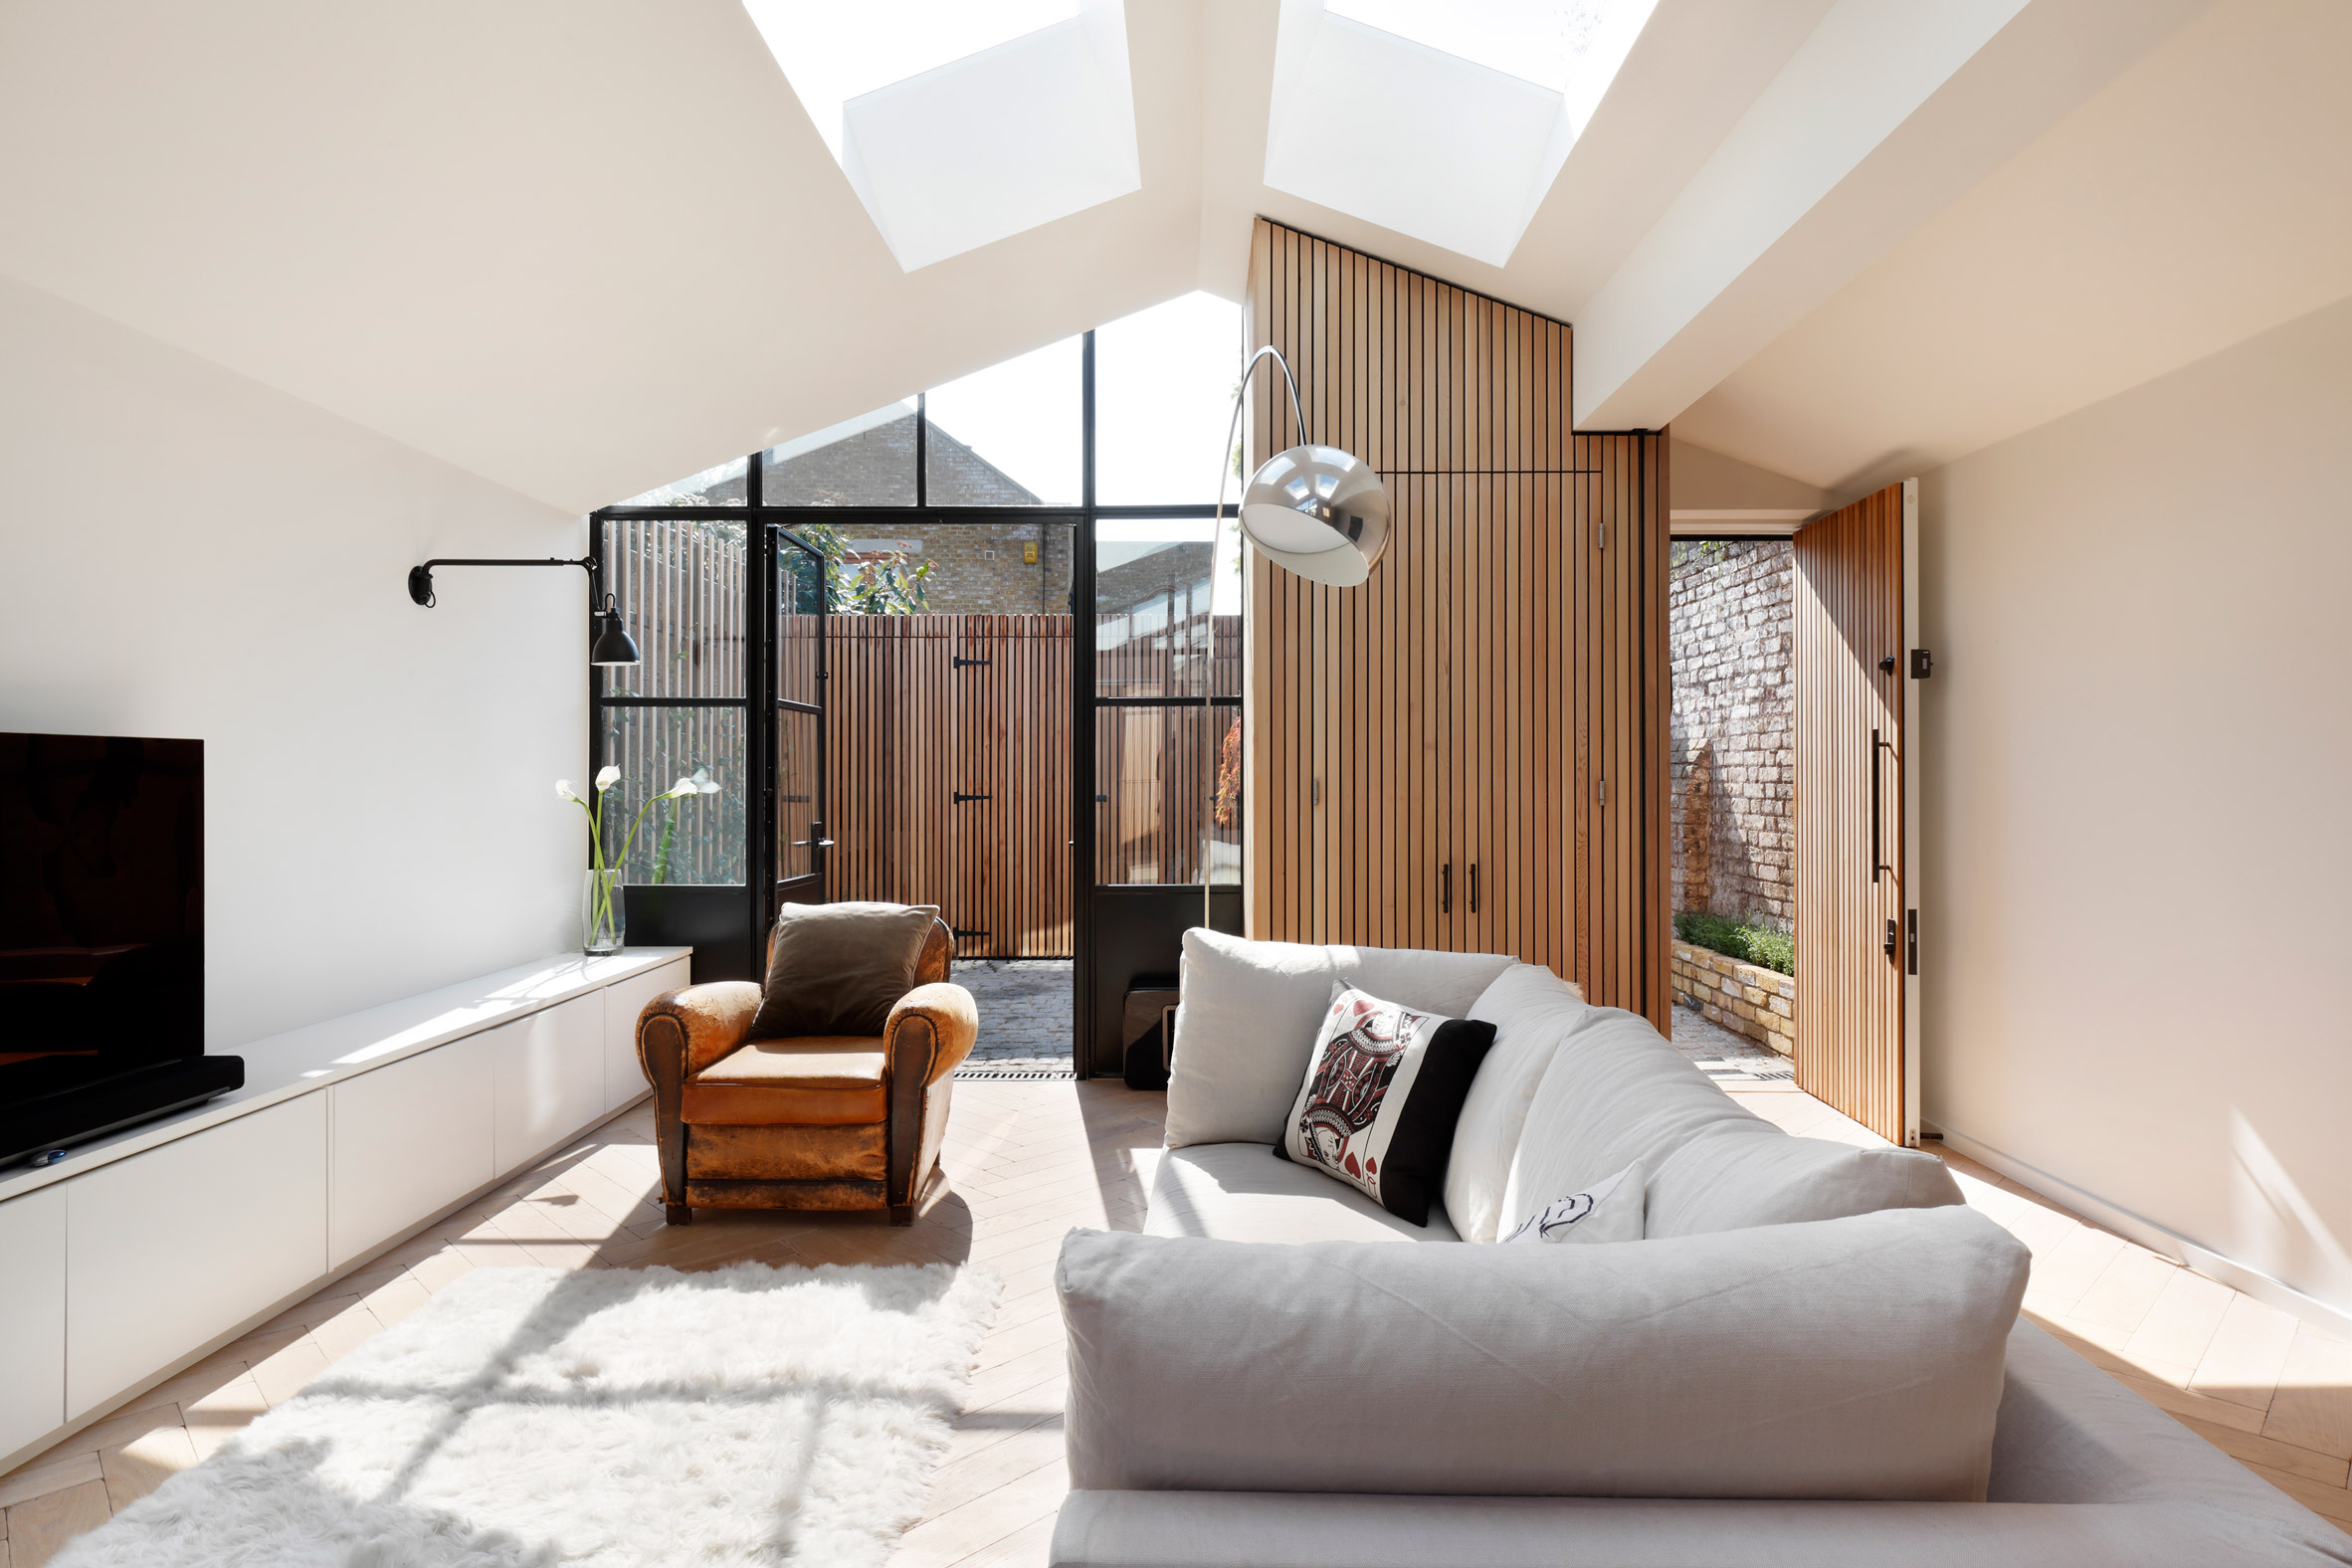 Modern Floor Lamps Bring Light into West London House 1